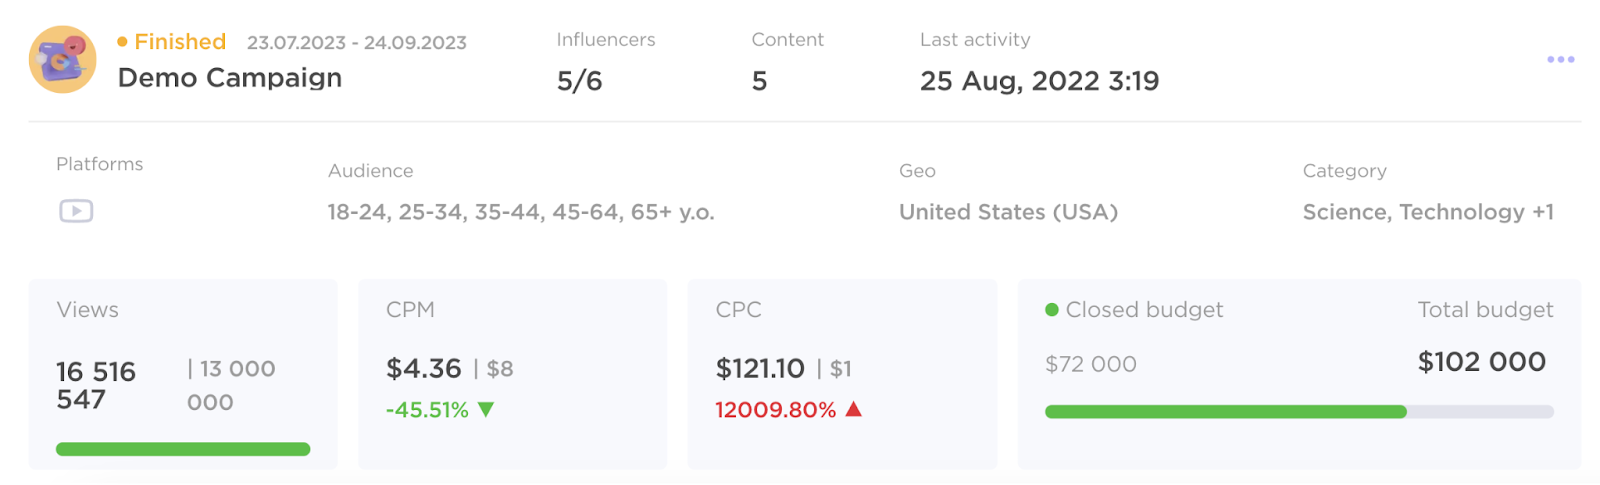 Demo Campaign dashboard successful  the Influencer Analytics tool